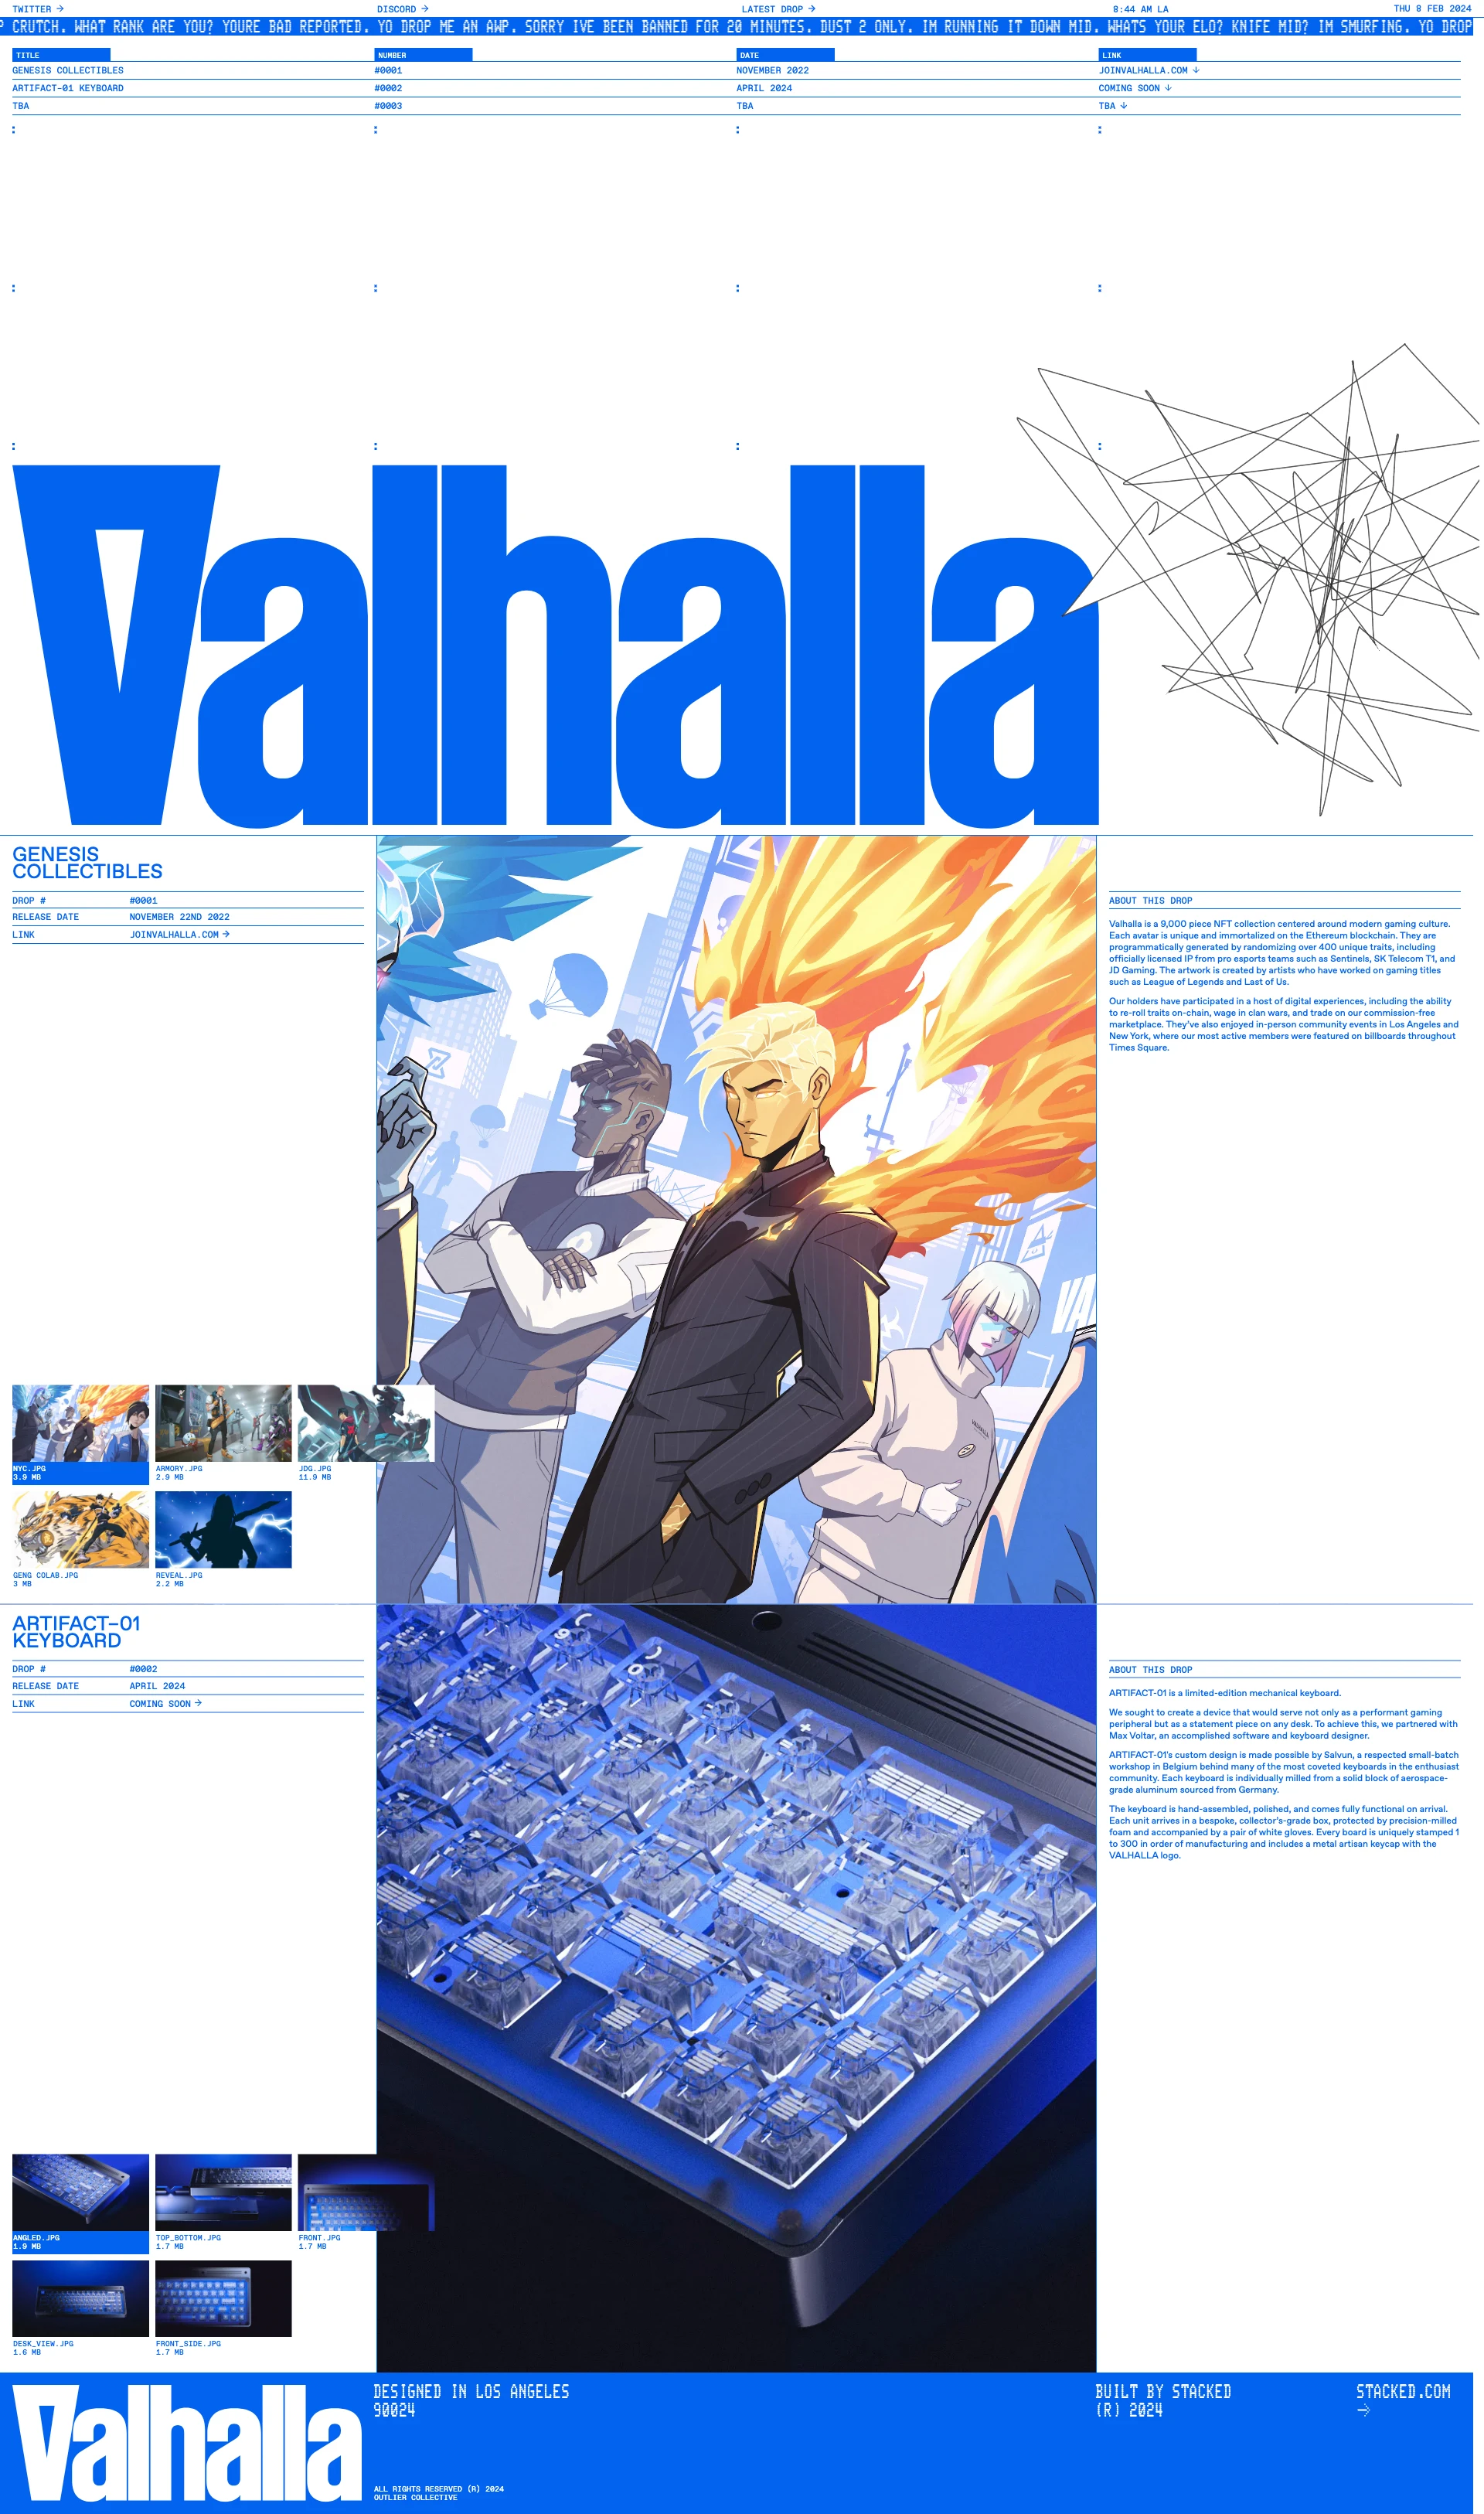 Valhalla Landing Page Example: Valhalla is a 9,000 piece NFT collection centered around modern gaming culture. Each avatar is unique and immortalized on the Ethereum blockchain. They are programmatically generated by randomizing over 400 unique traits, including officially licensed IP from pro esports teams such as Sentinels, SK Telecom T1, and JD Gaming. The artwork is created by artists who have worked on gaming titles such as League of Legends and Last of Us.